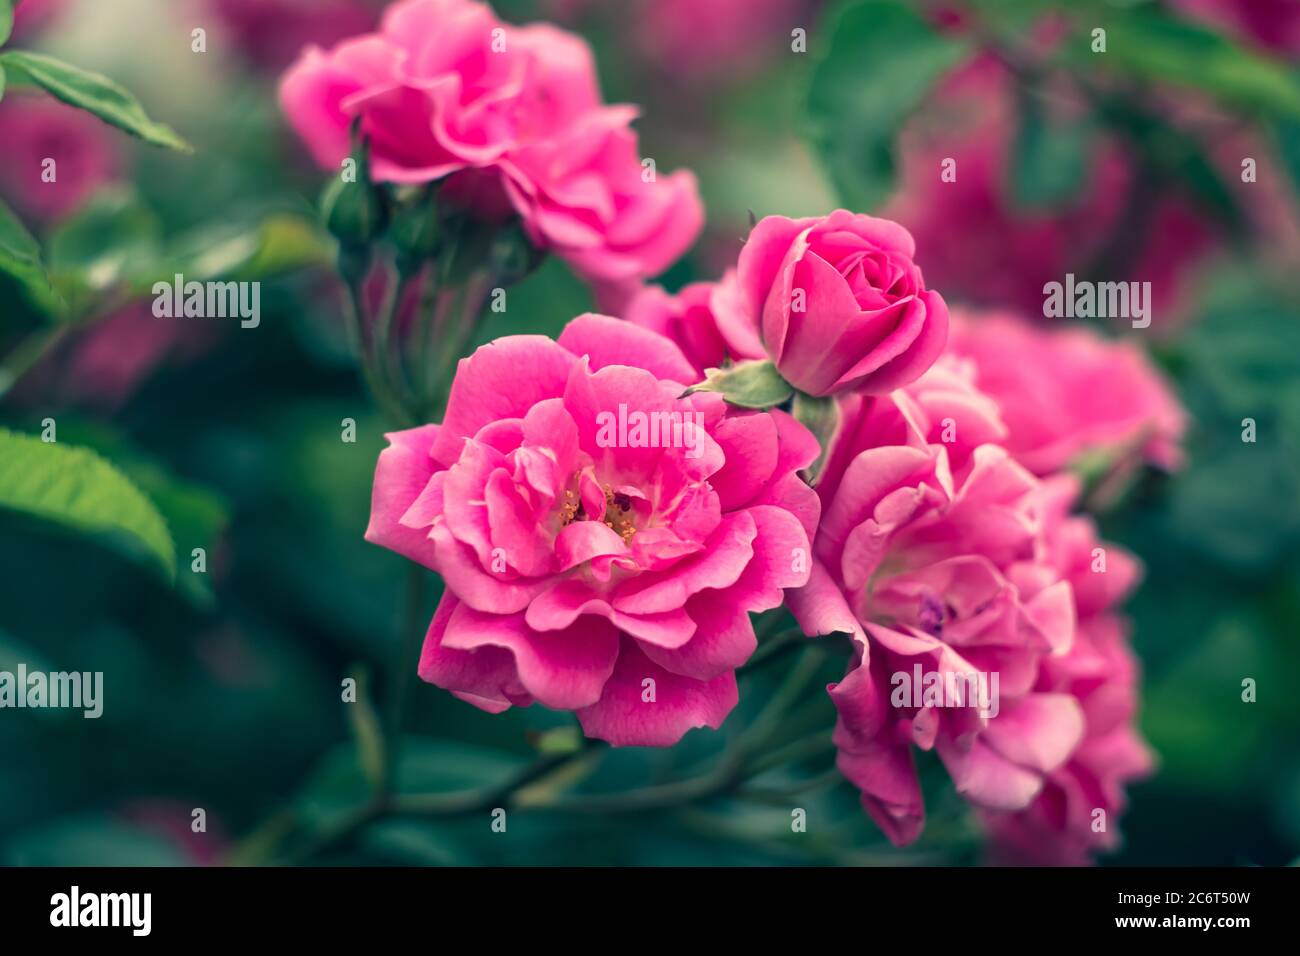 Garden roses, rose bush, pink flowers in the garden, colorful nature backgrounds. Bright floral wallpaper. Modern hedge. Selective focus Stock Photo